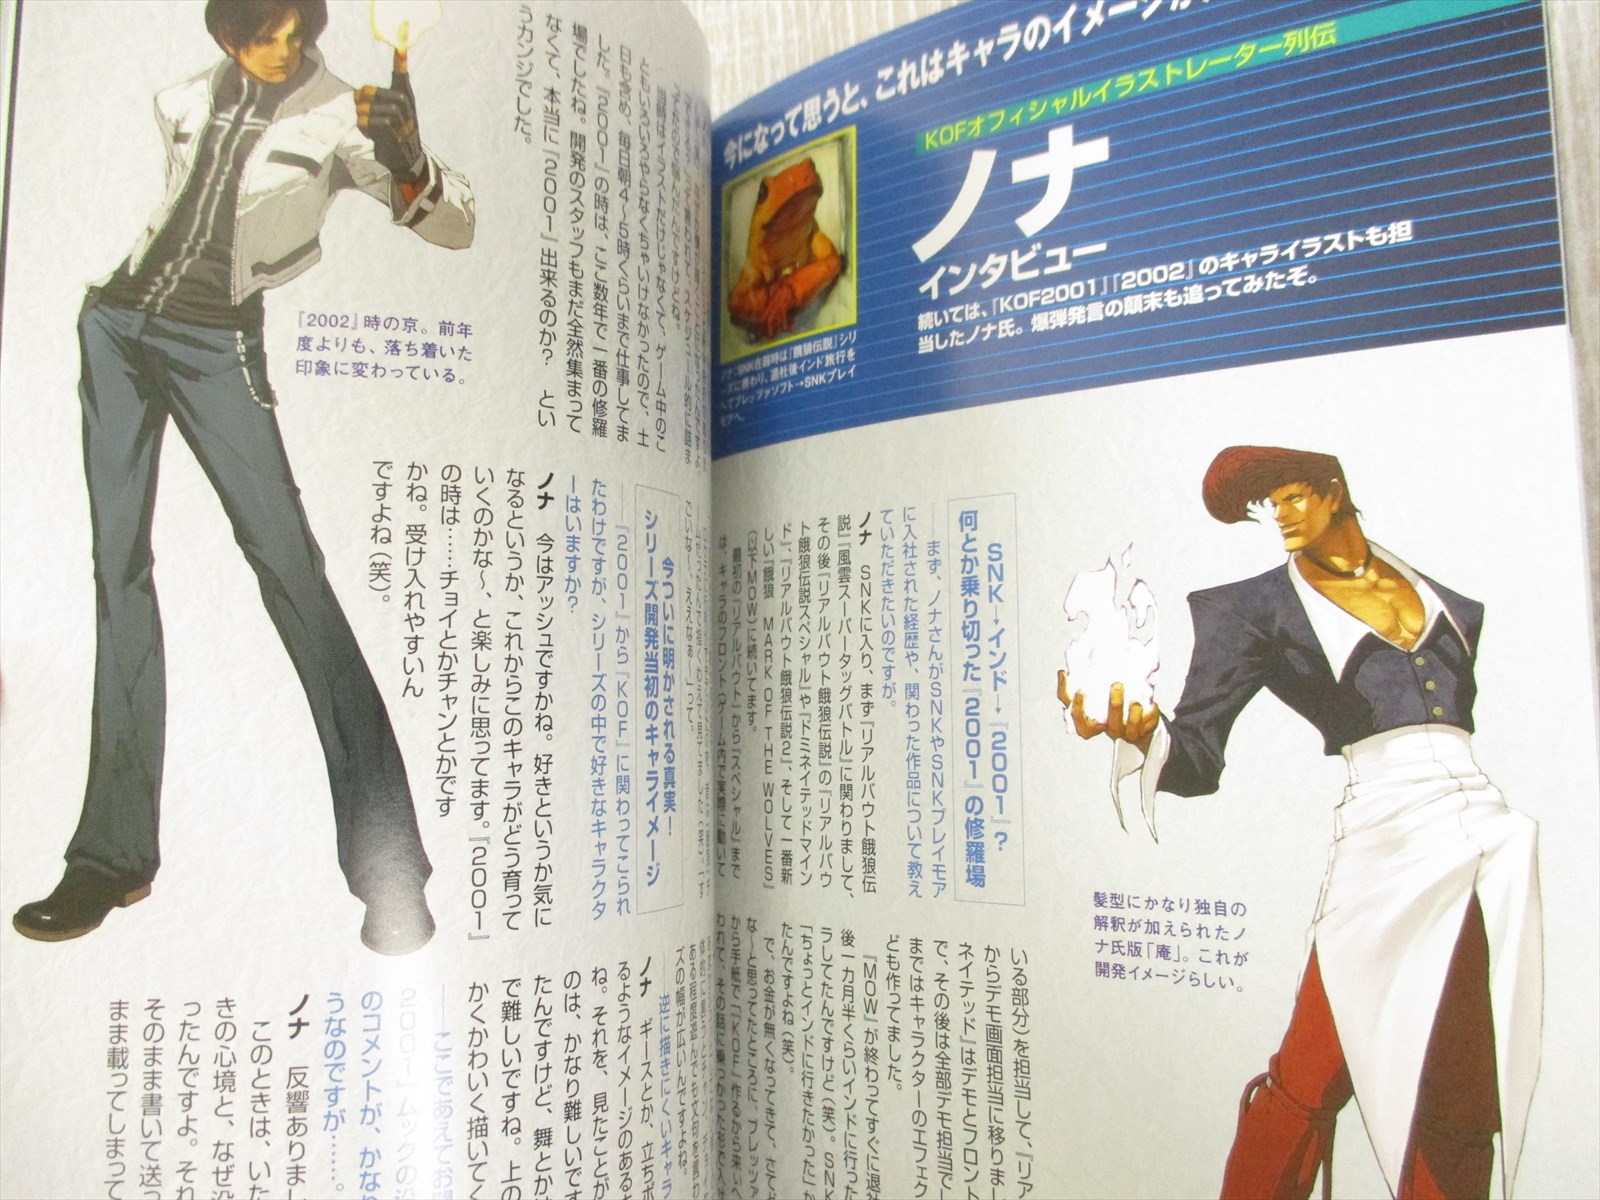 King Of Fighters 94 Orochi Story Profiling Book Art Material Fanbook Neo Geo Ebay